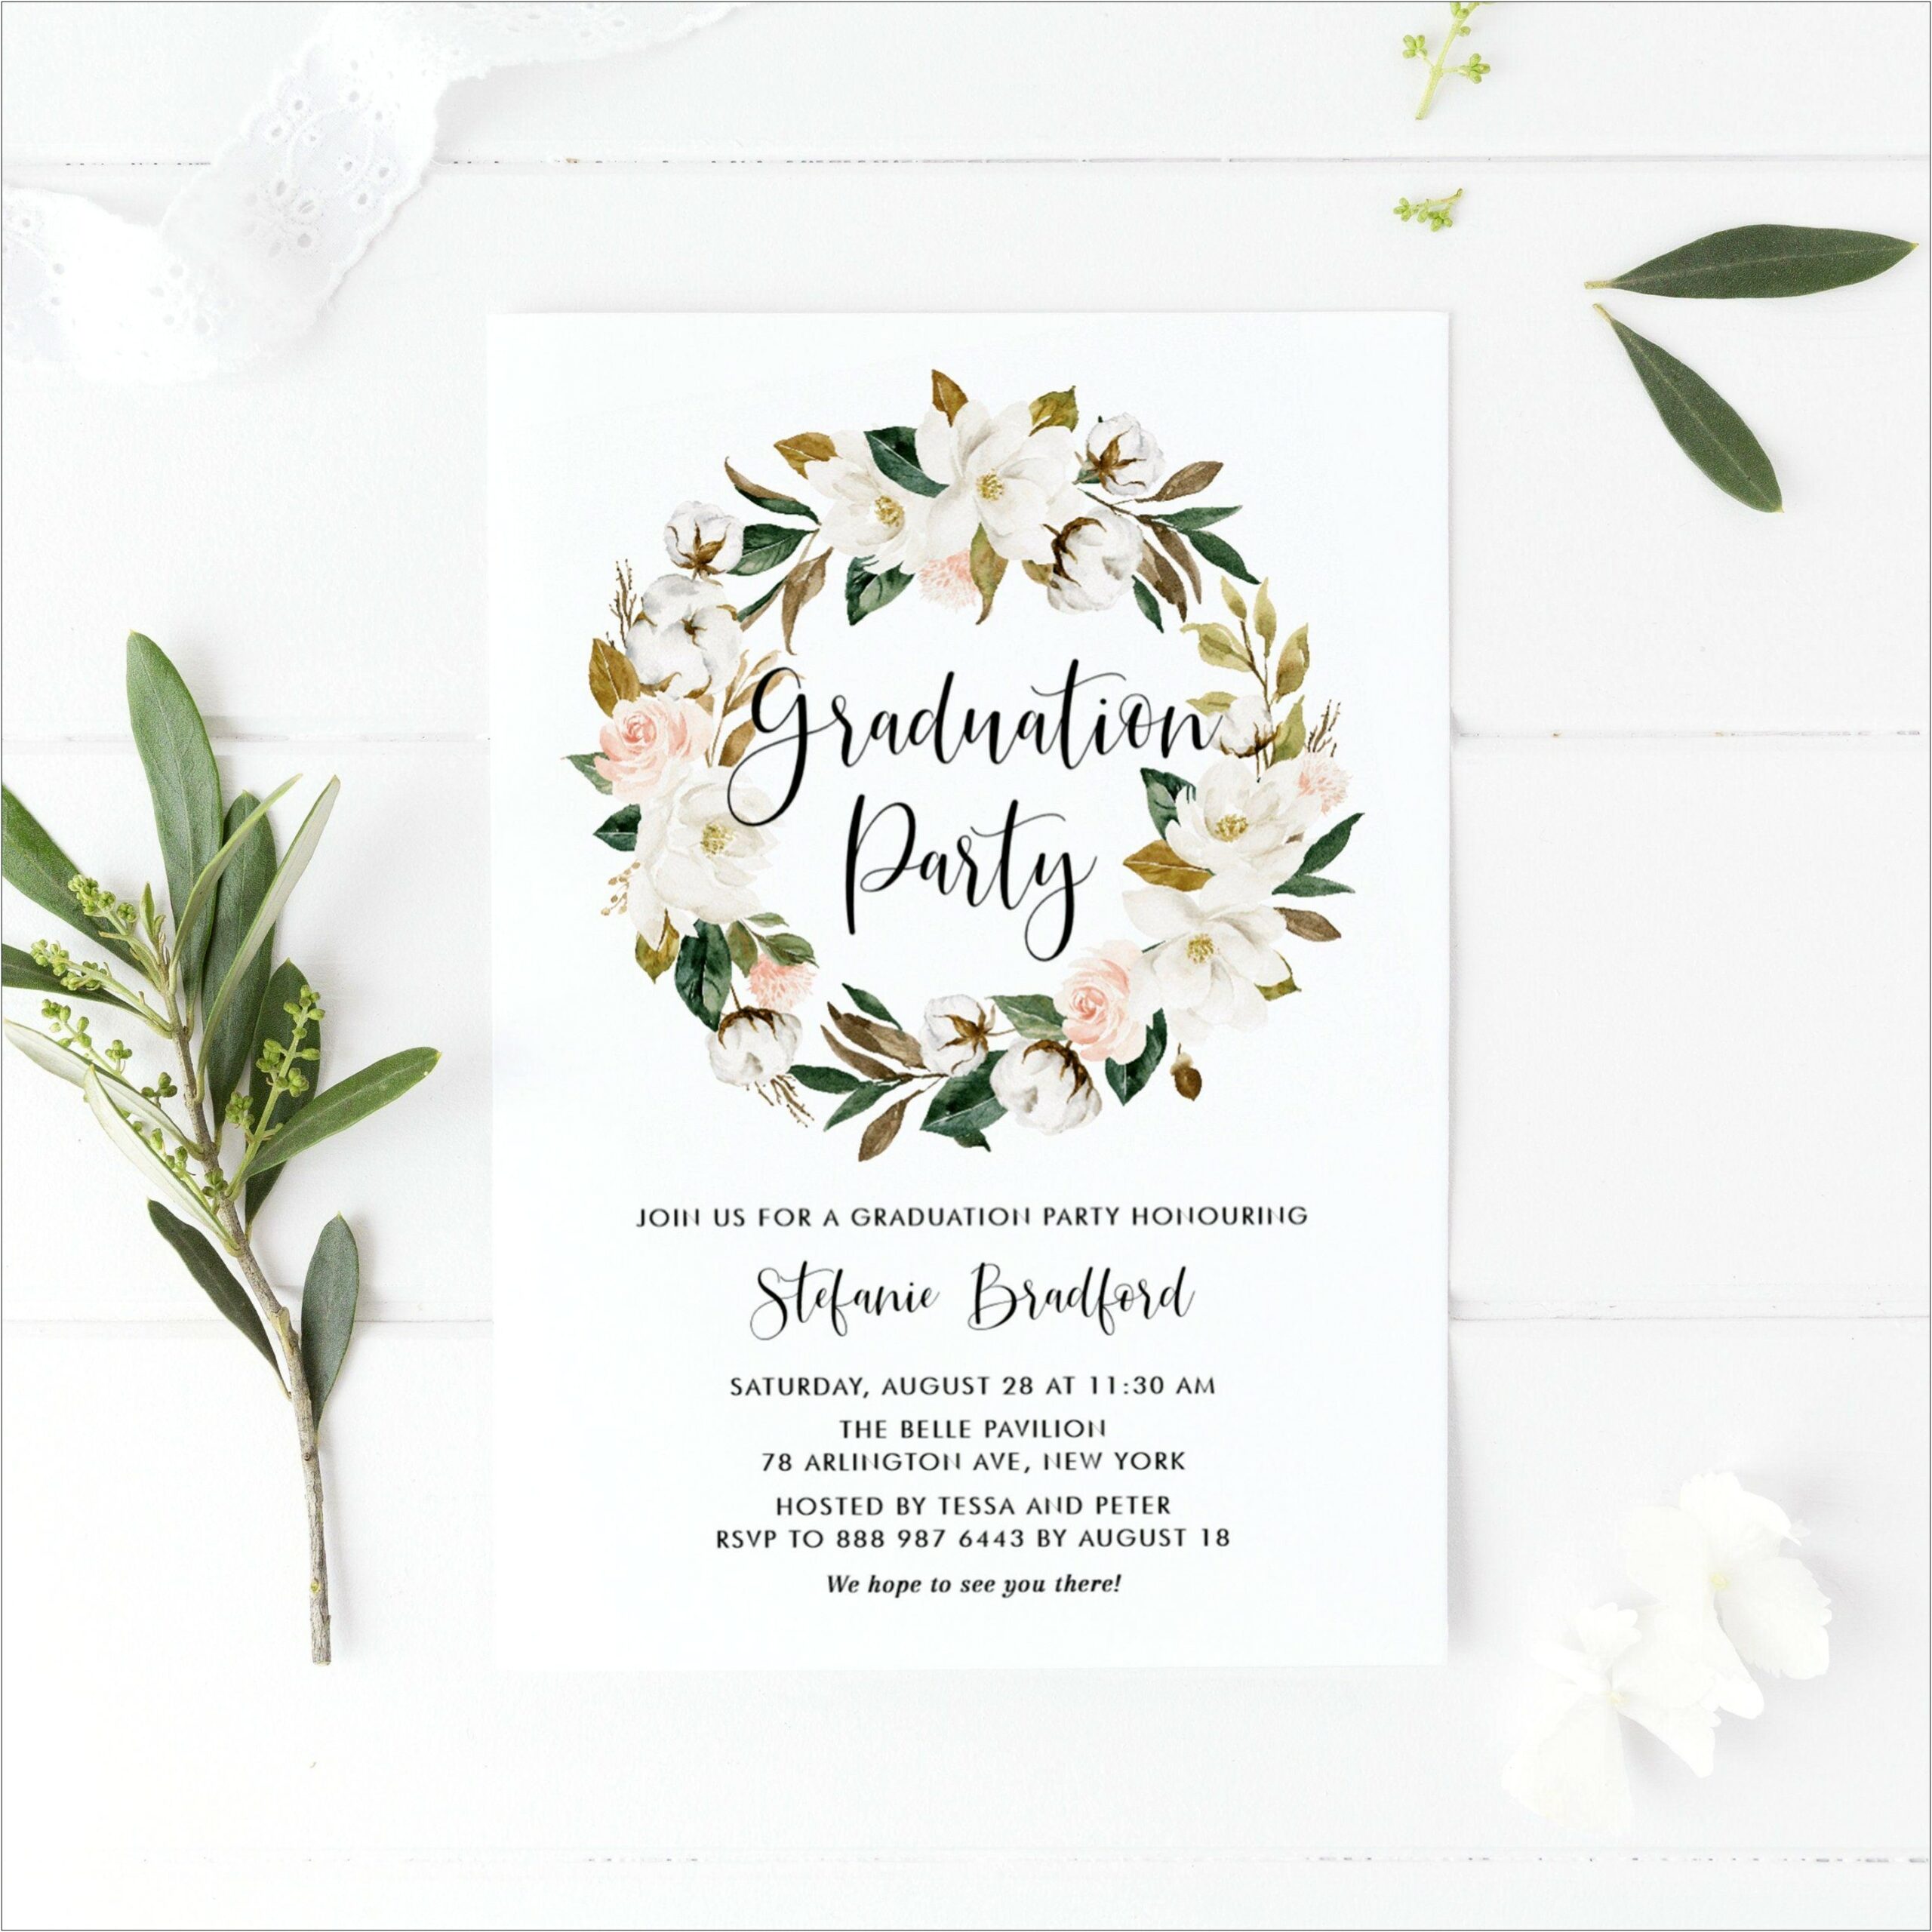 Graduation Invitation Template For Word With Watercolor